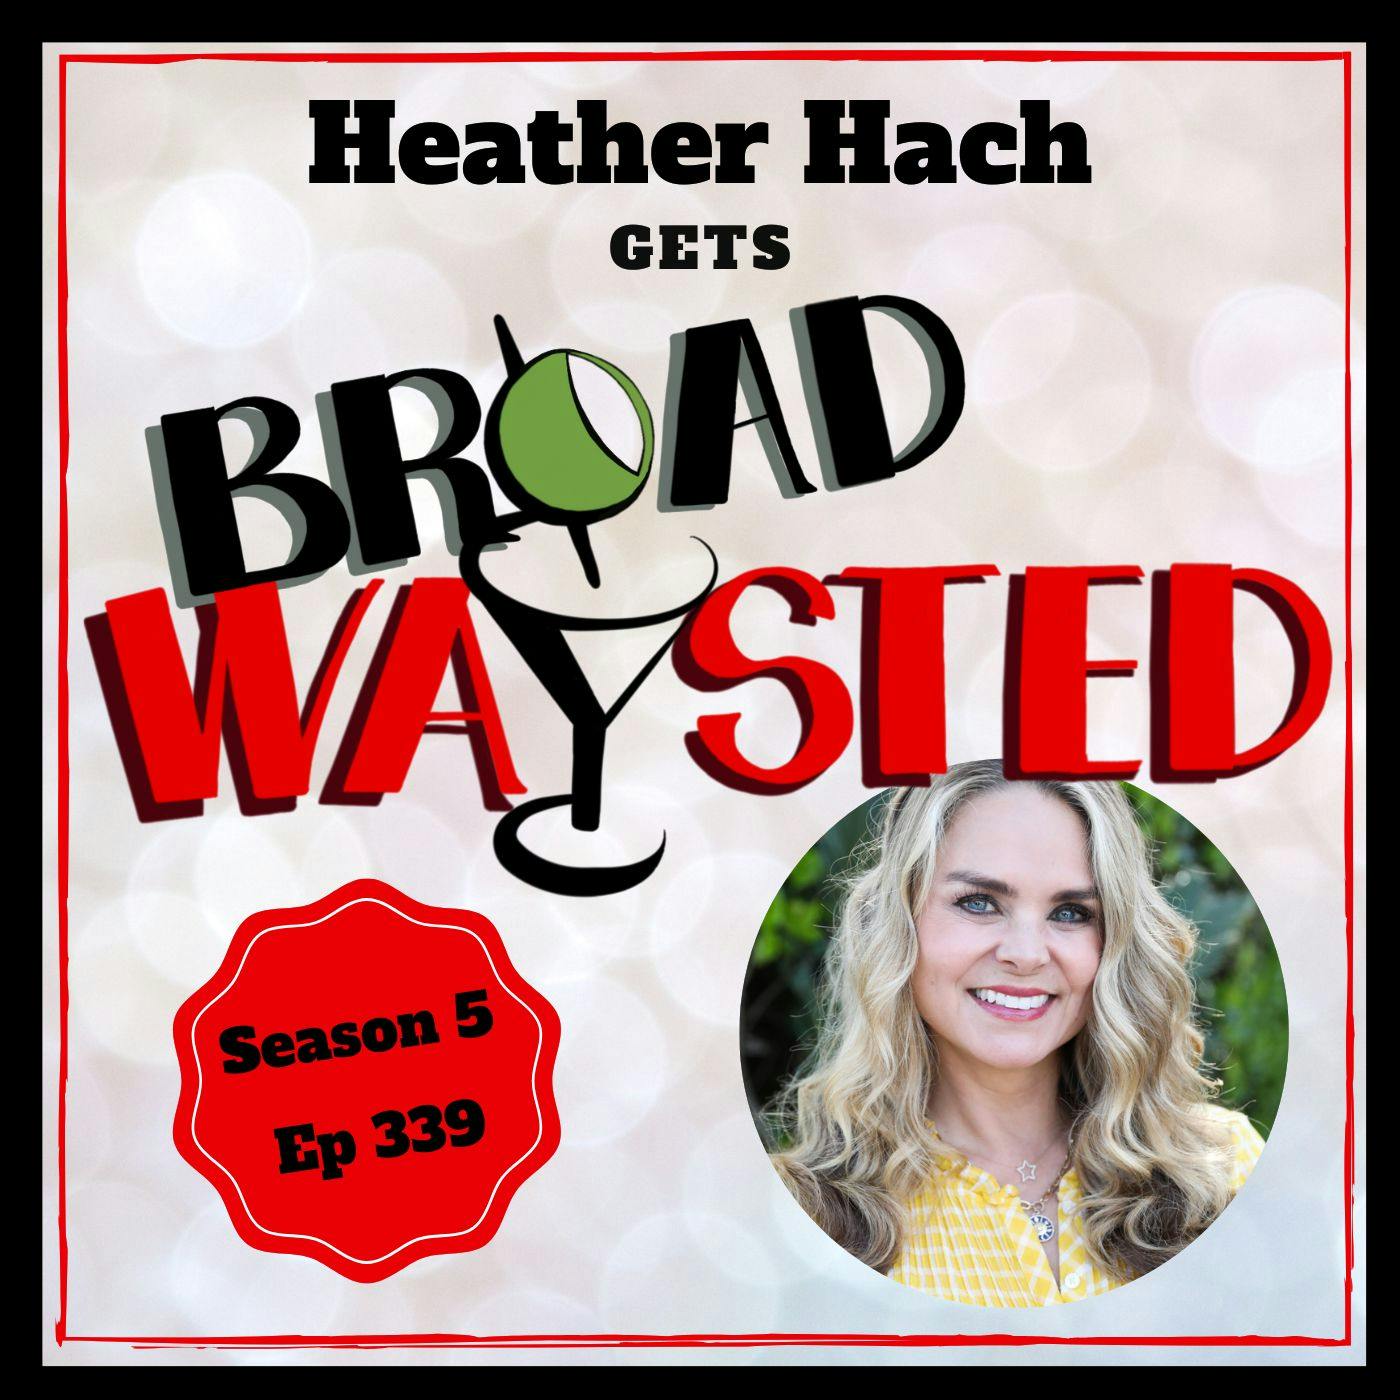 Episode 339: Heather Hach gets Broadwaysted!